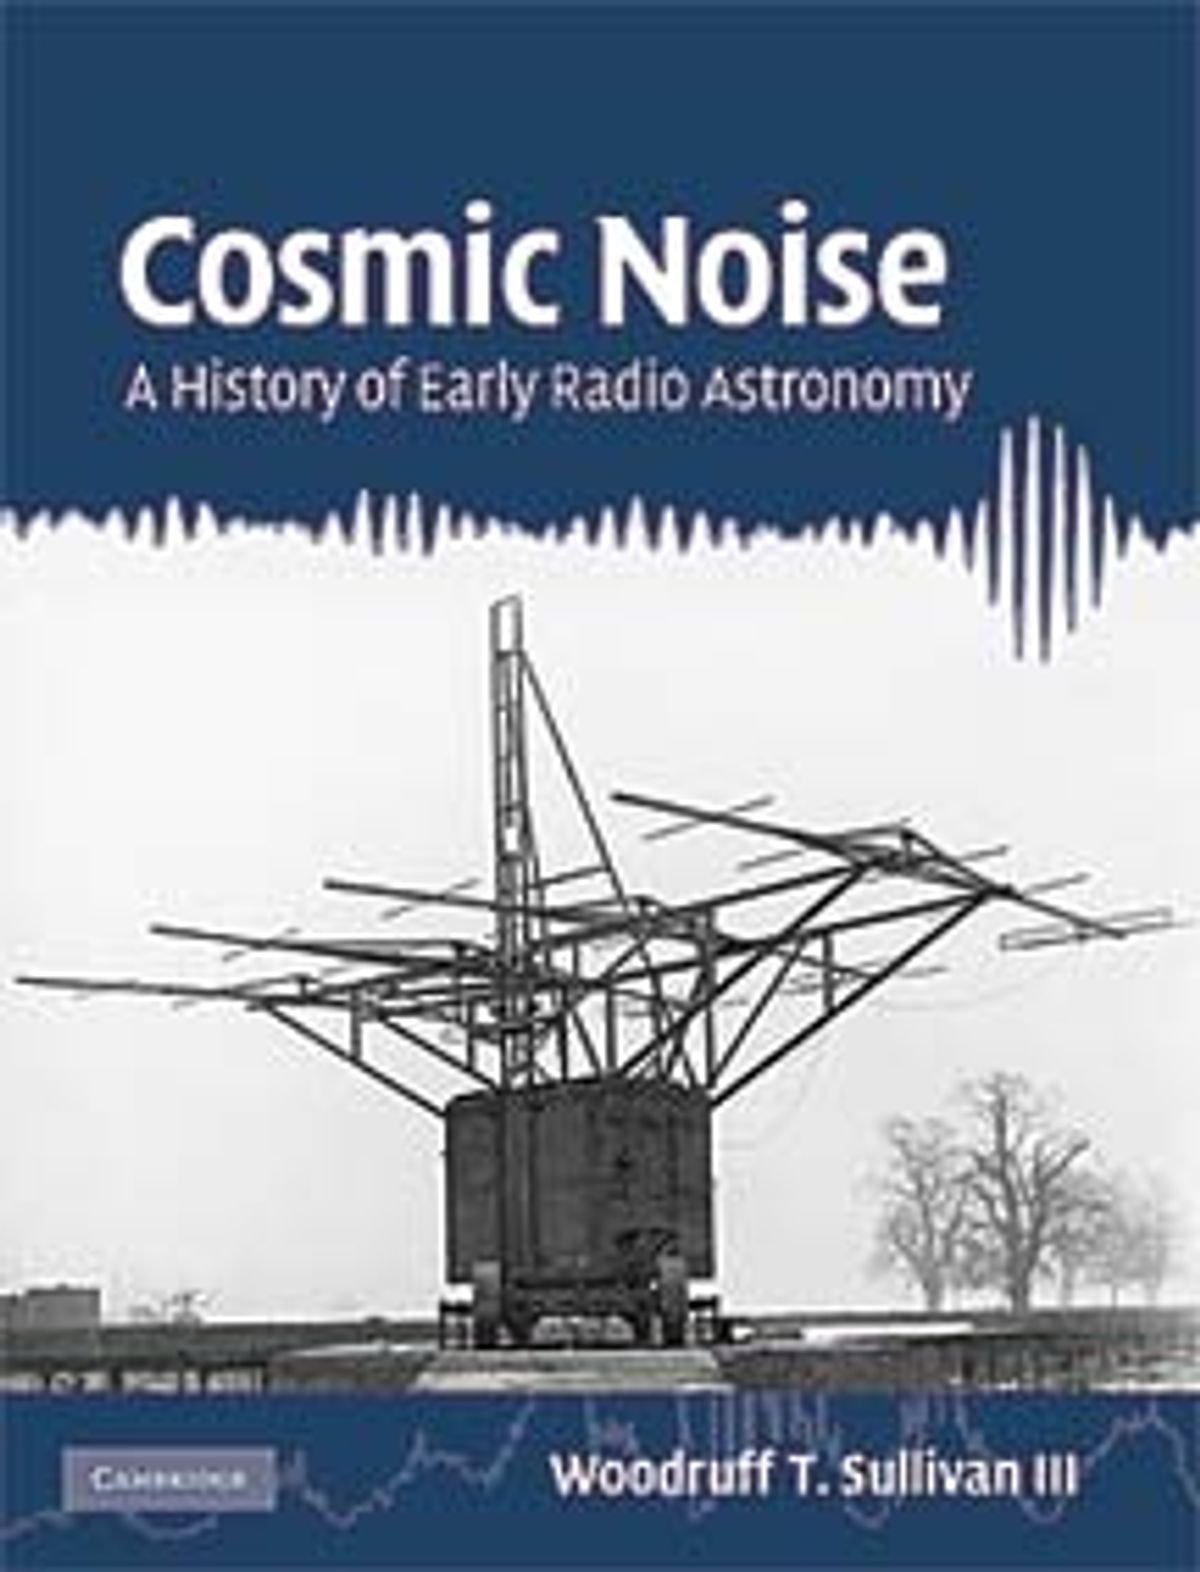 Book: Cosmic Noise: A History of Early Radio Astronomy